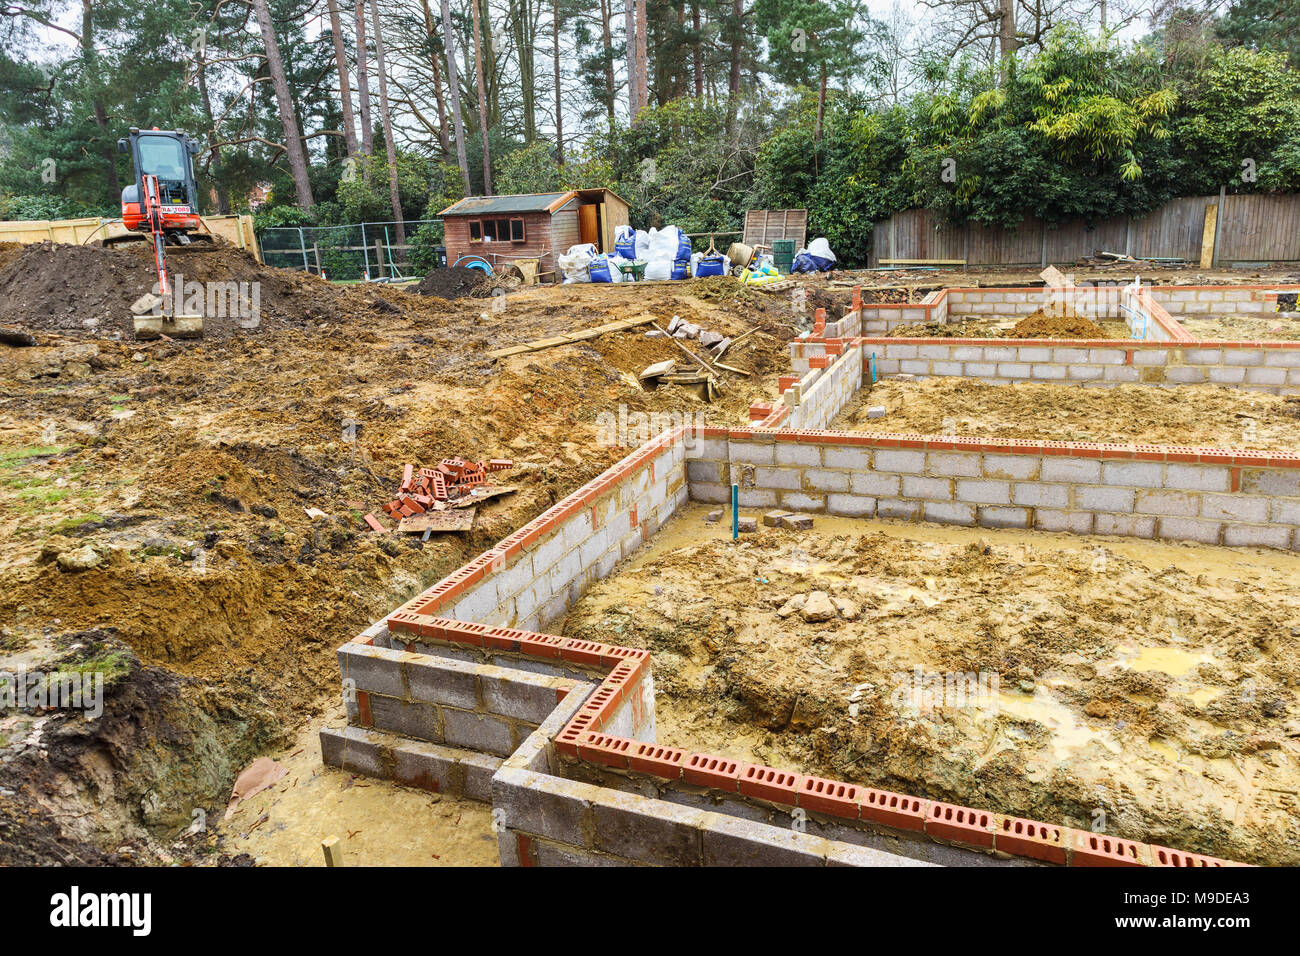 Brick and breeze block foundations for a new house on a construction site for a new residential development Stock Photo